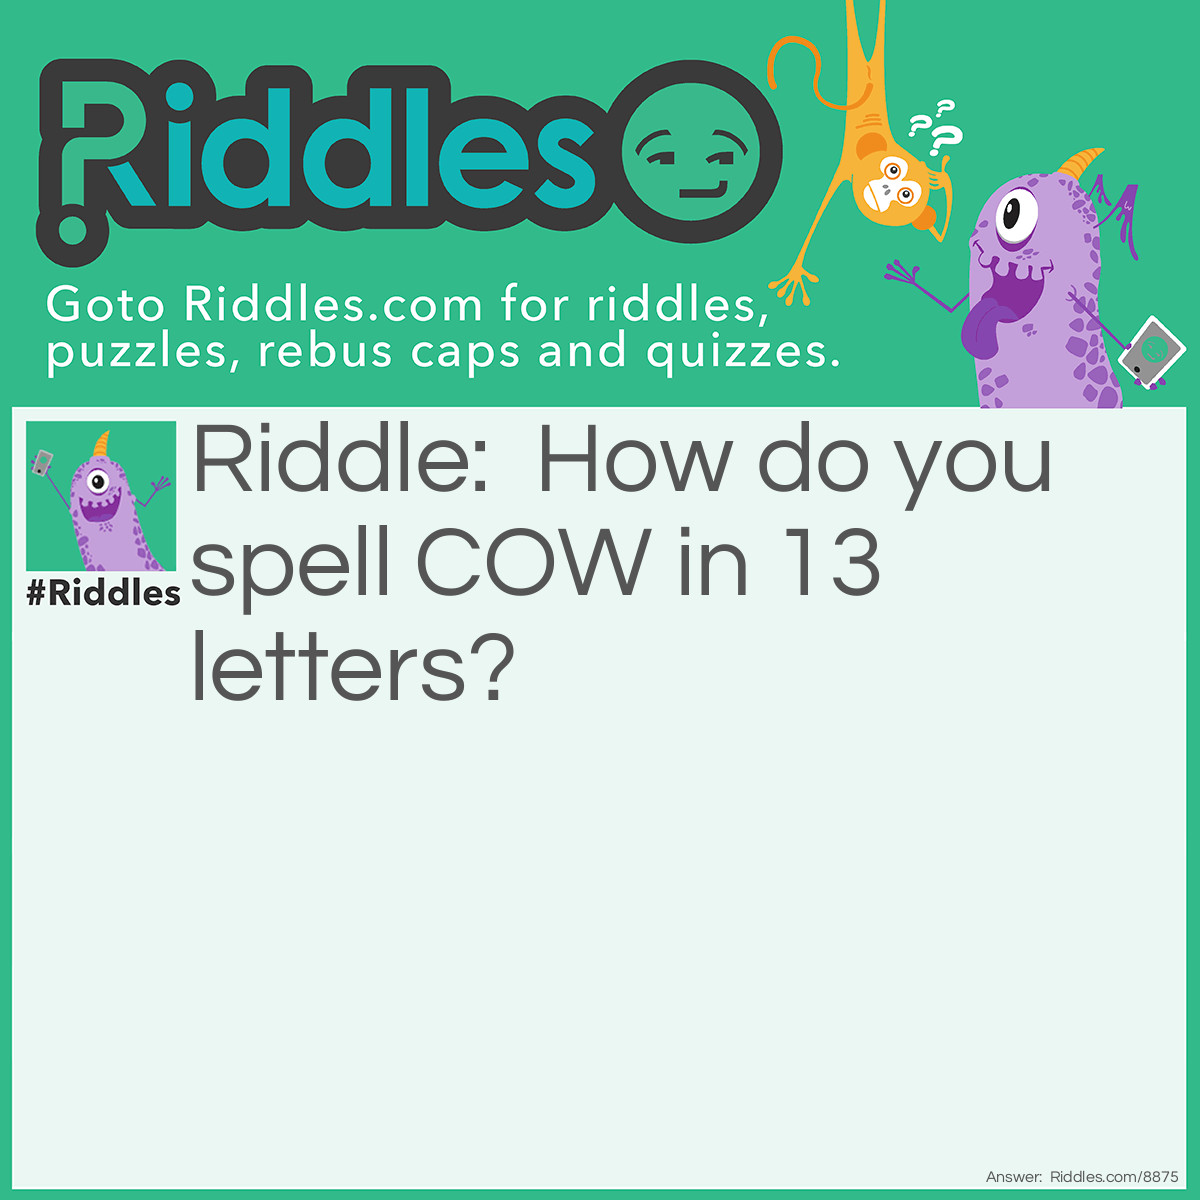 Riddle: How do you spell COW in 13 letters? Answer: SEE O DOUBLE YOU.